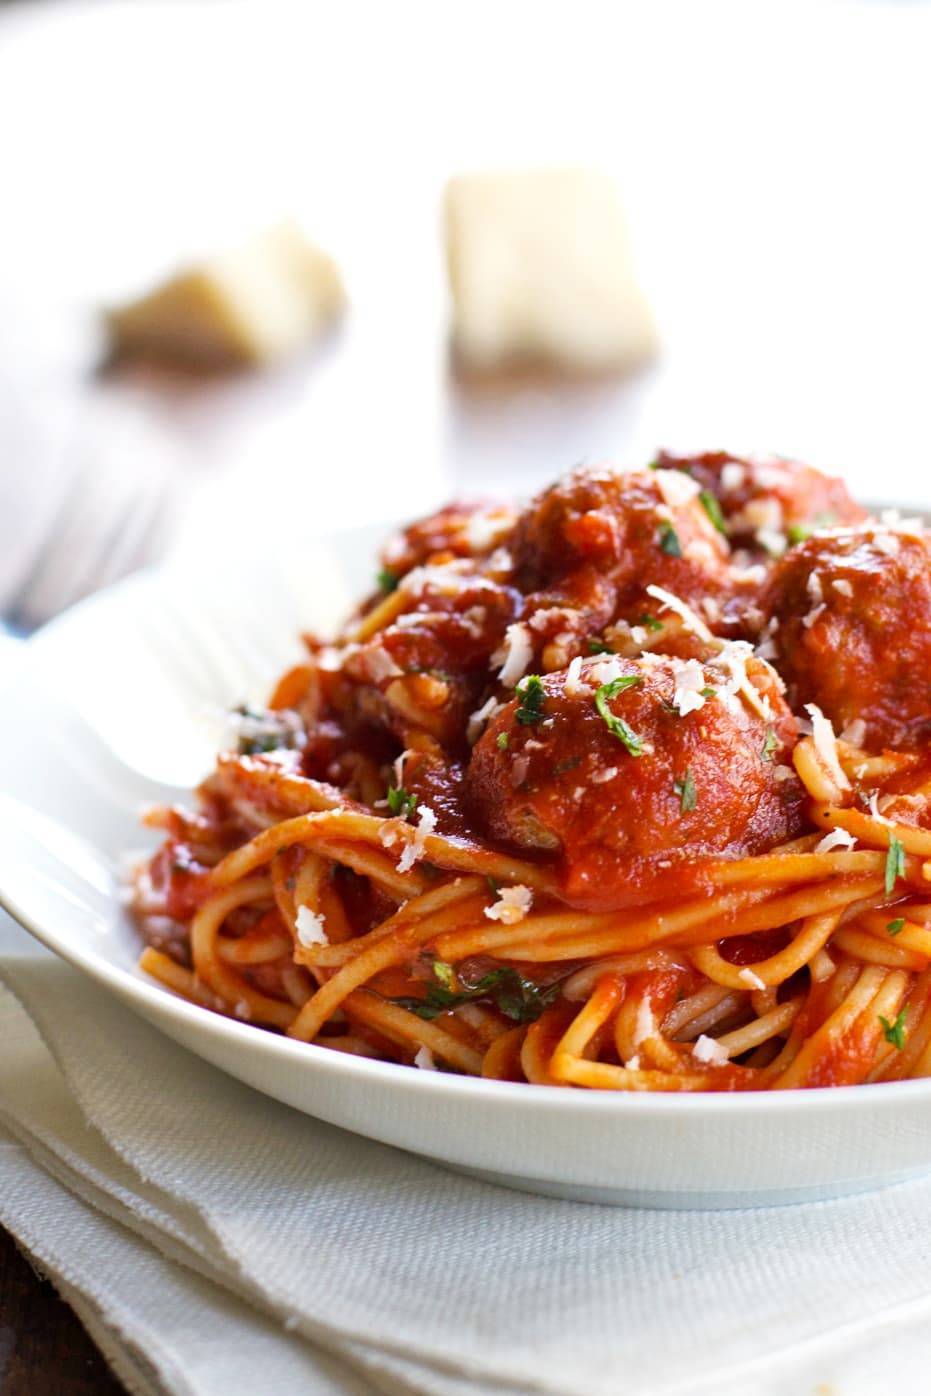 Spaghetti and Meatballs on a plate.